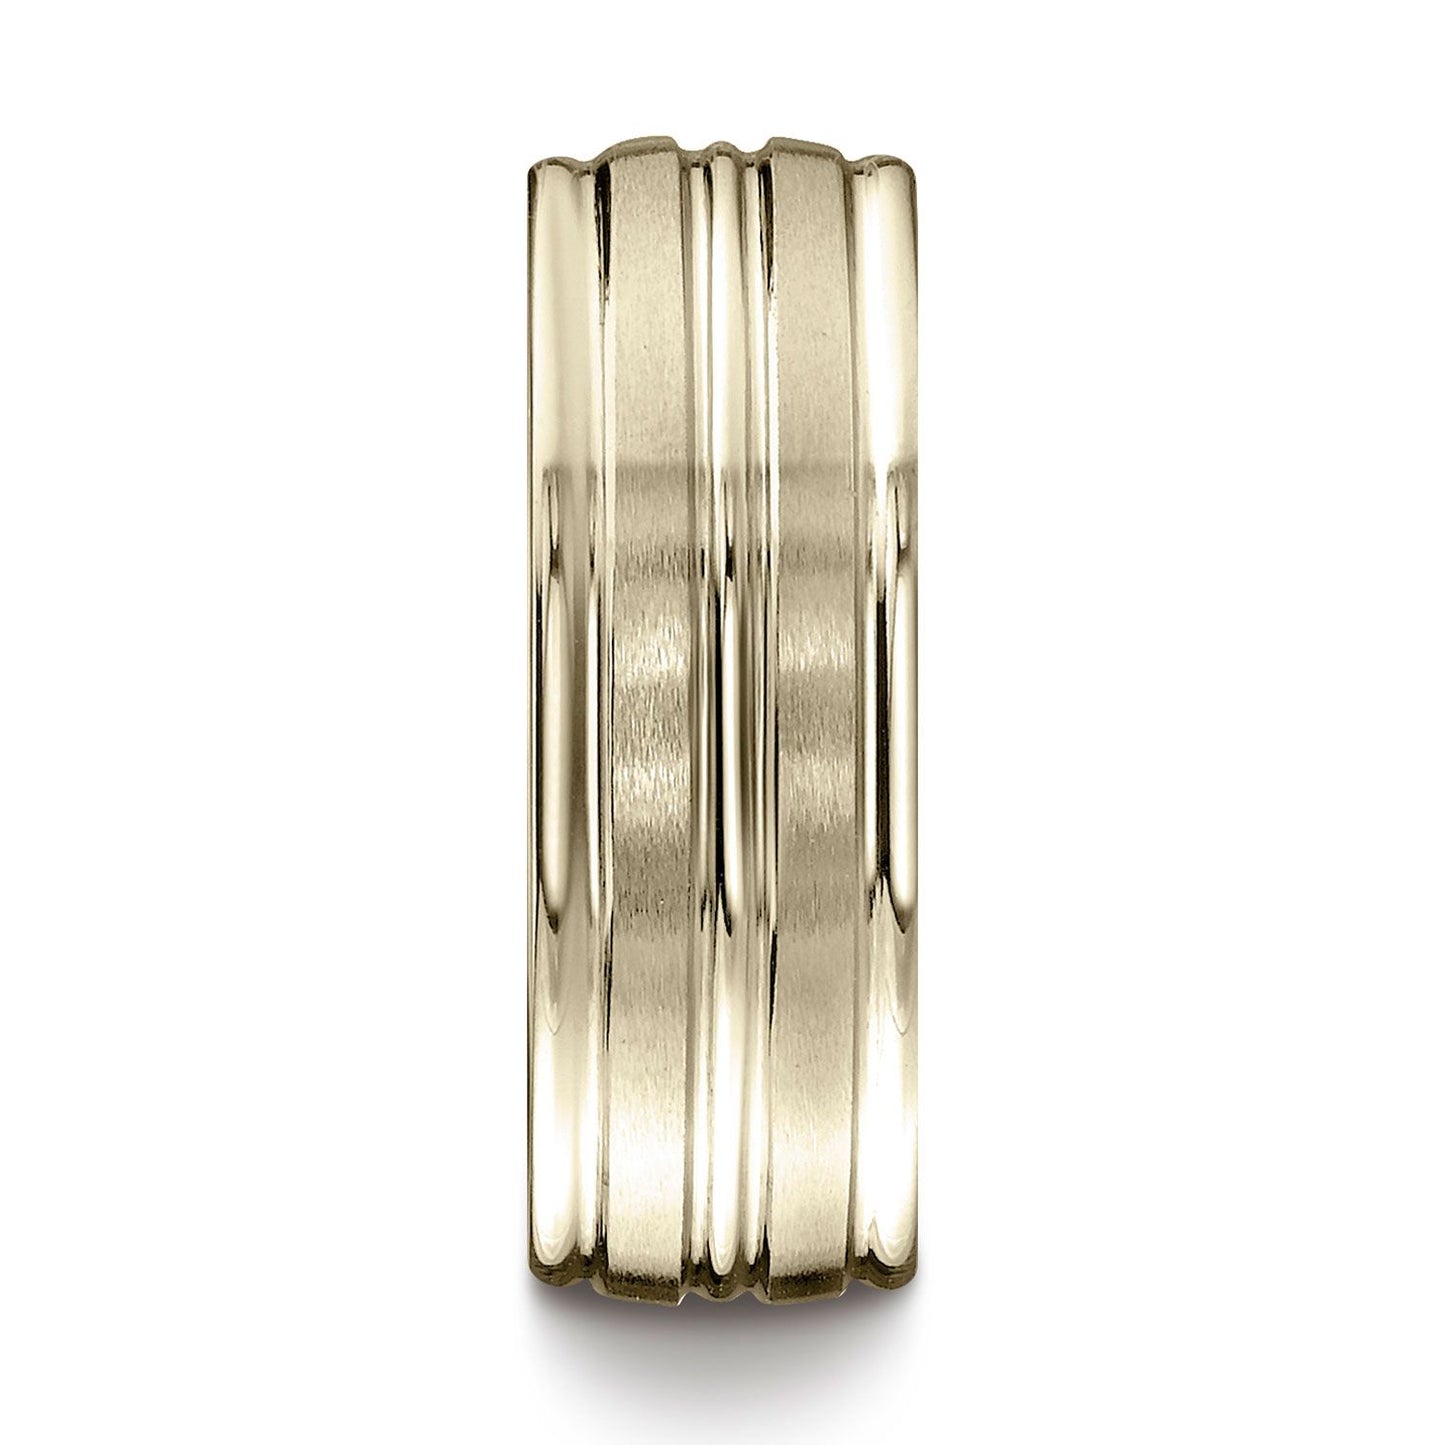 14k Yellow Gold 8mm Comfort-fit Satin-finished High Polished Center Trim And Round Edge Carved Design Band